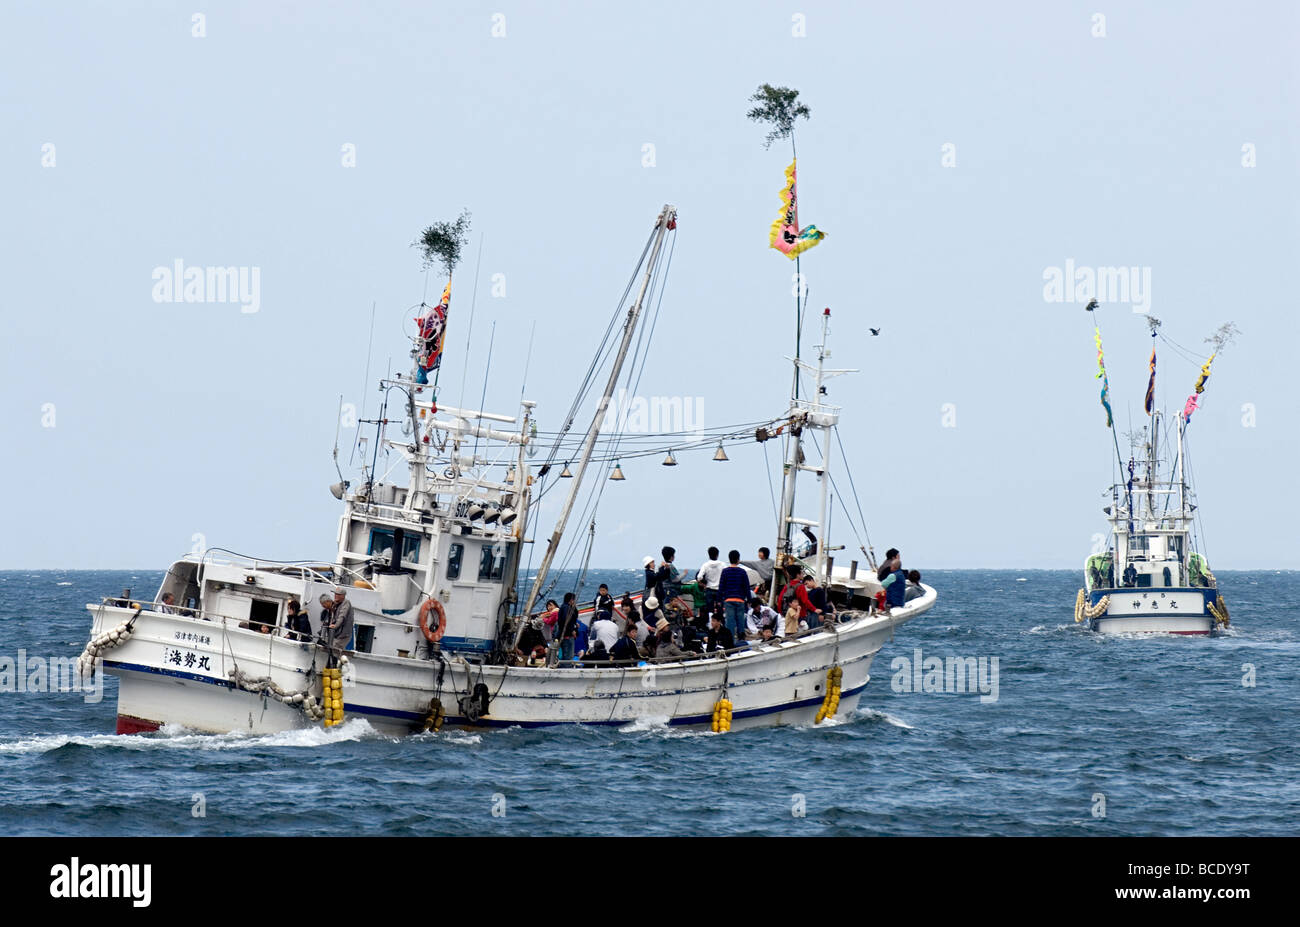 Japanese fishing boats making their way through the choppy Pacific Ocean carrying a crew and some festival goers Stock Photo